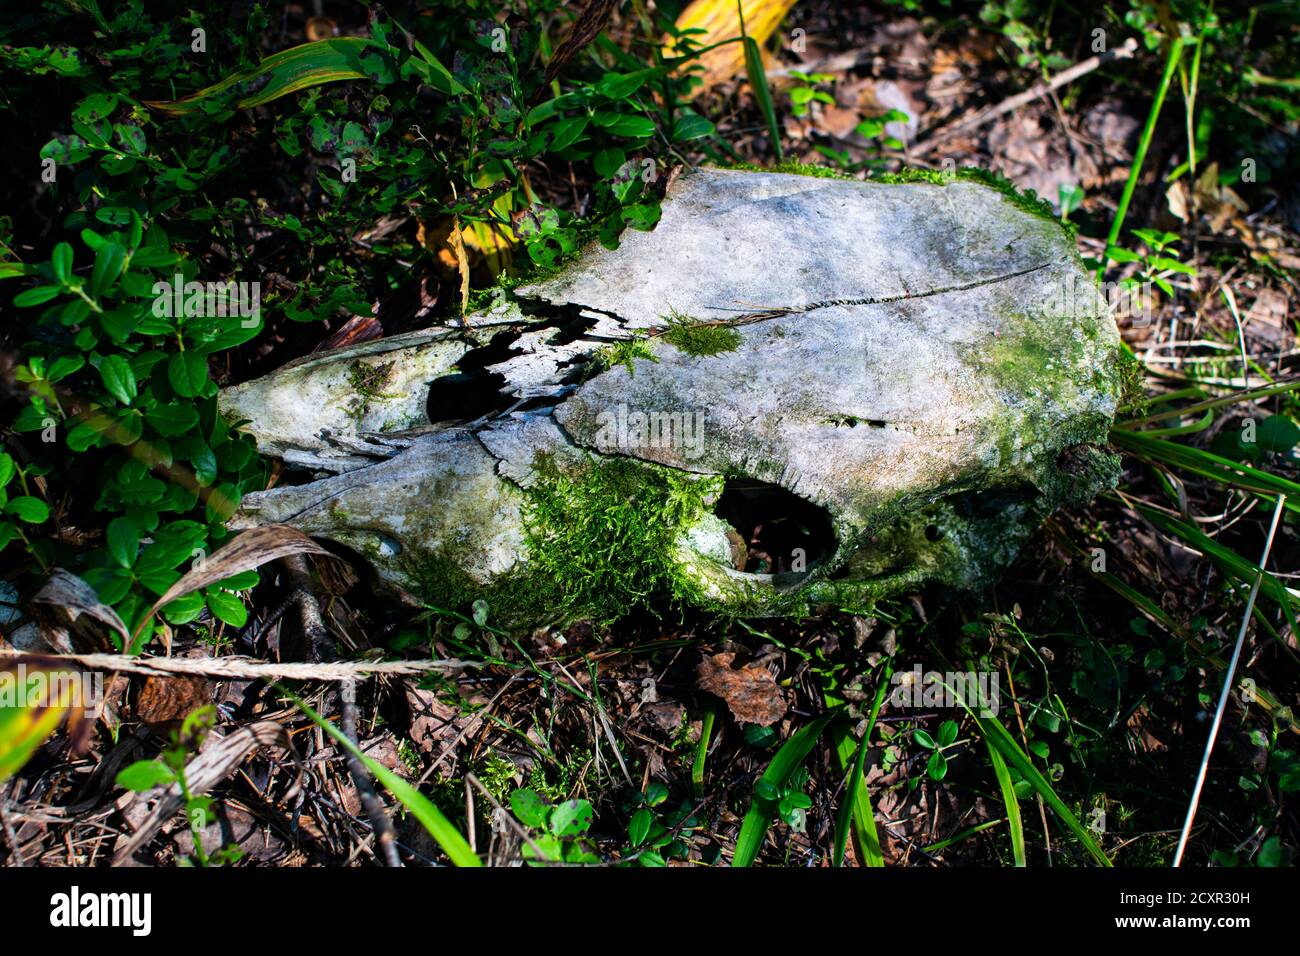 Animal skull in the green grass in the forest. Elk skull covered with soft green moss. Stock Photo